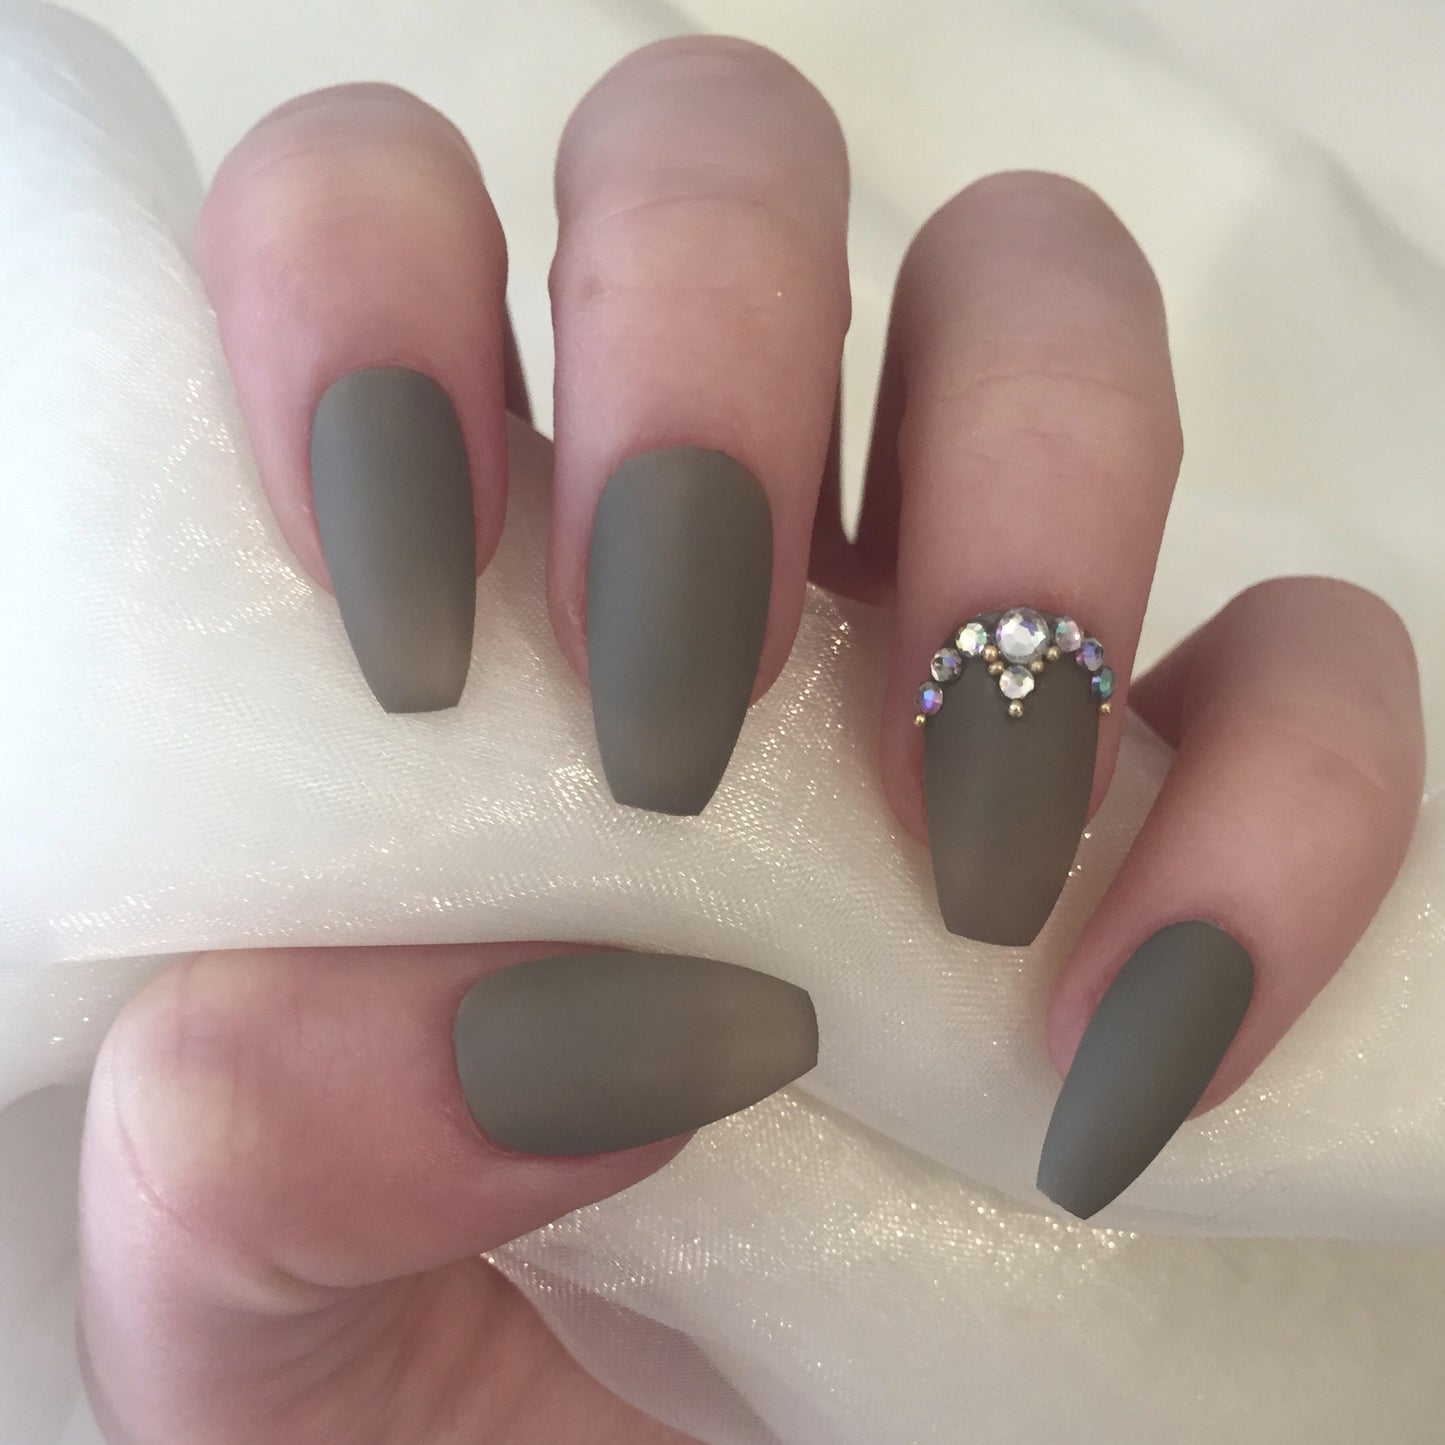 Matte Khaki Coffins with Gold Beads and Rhinestones